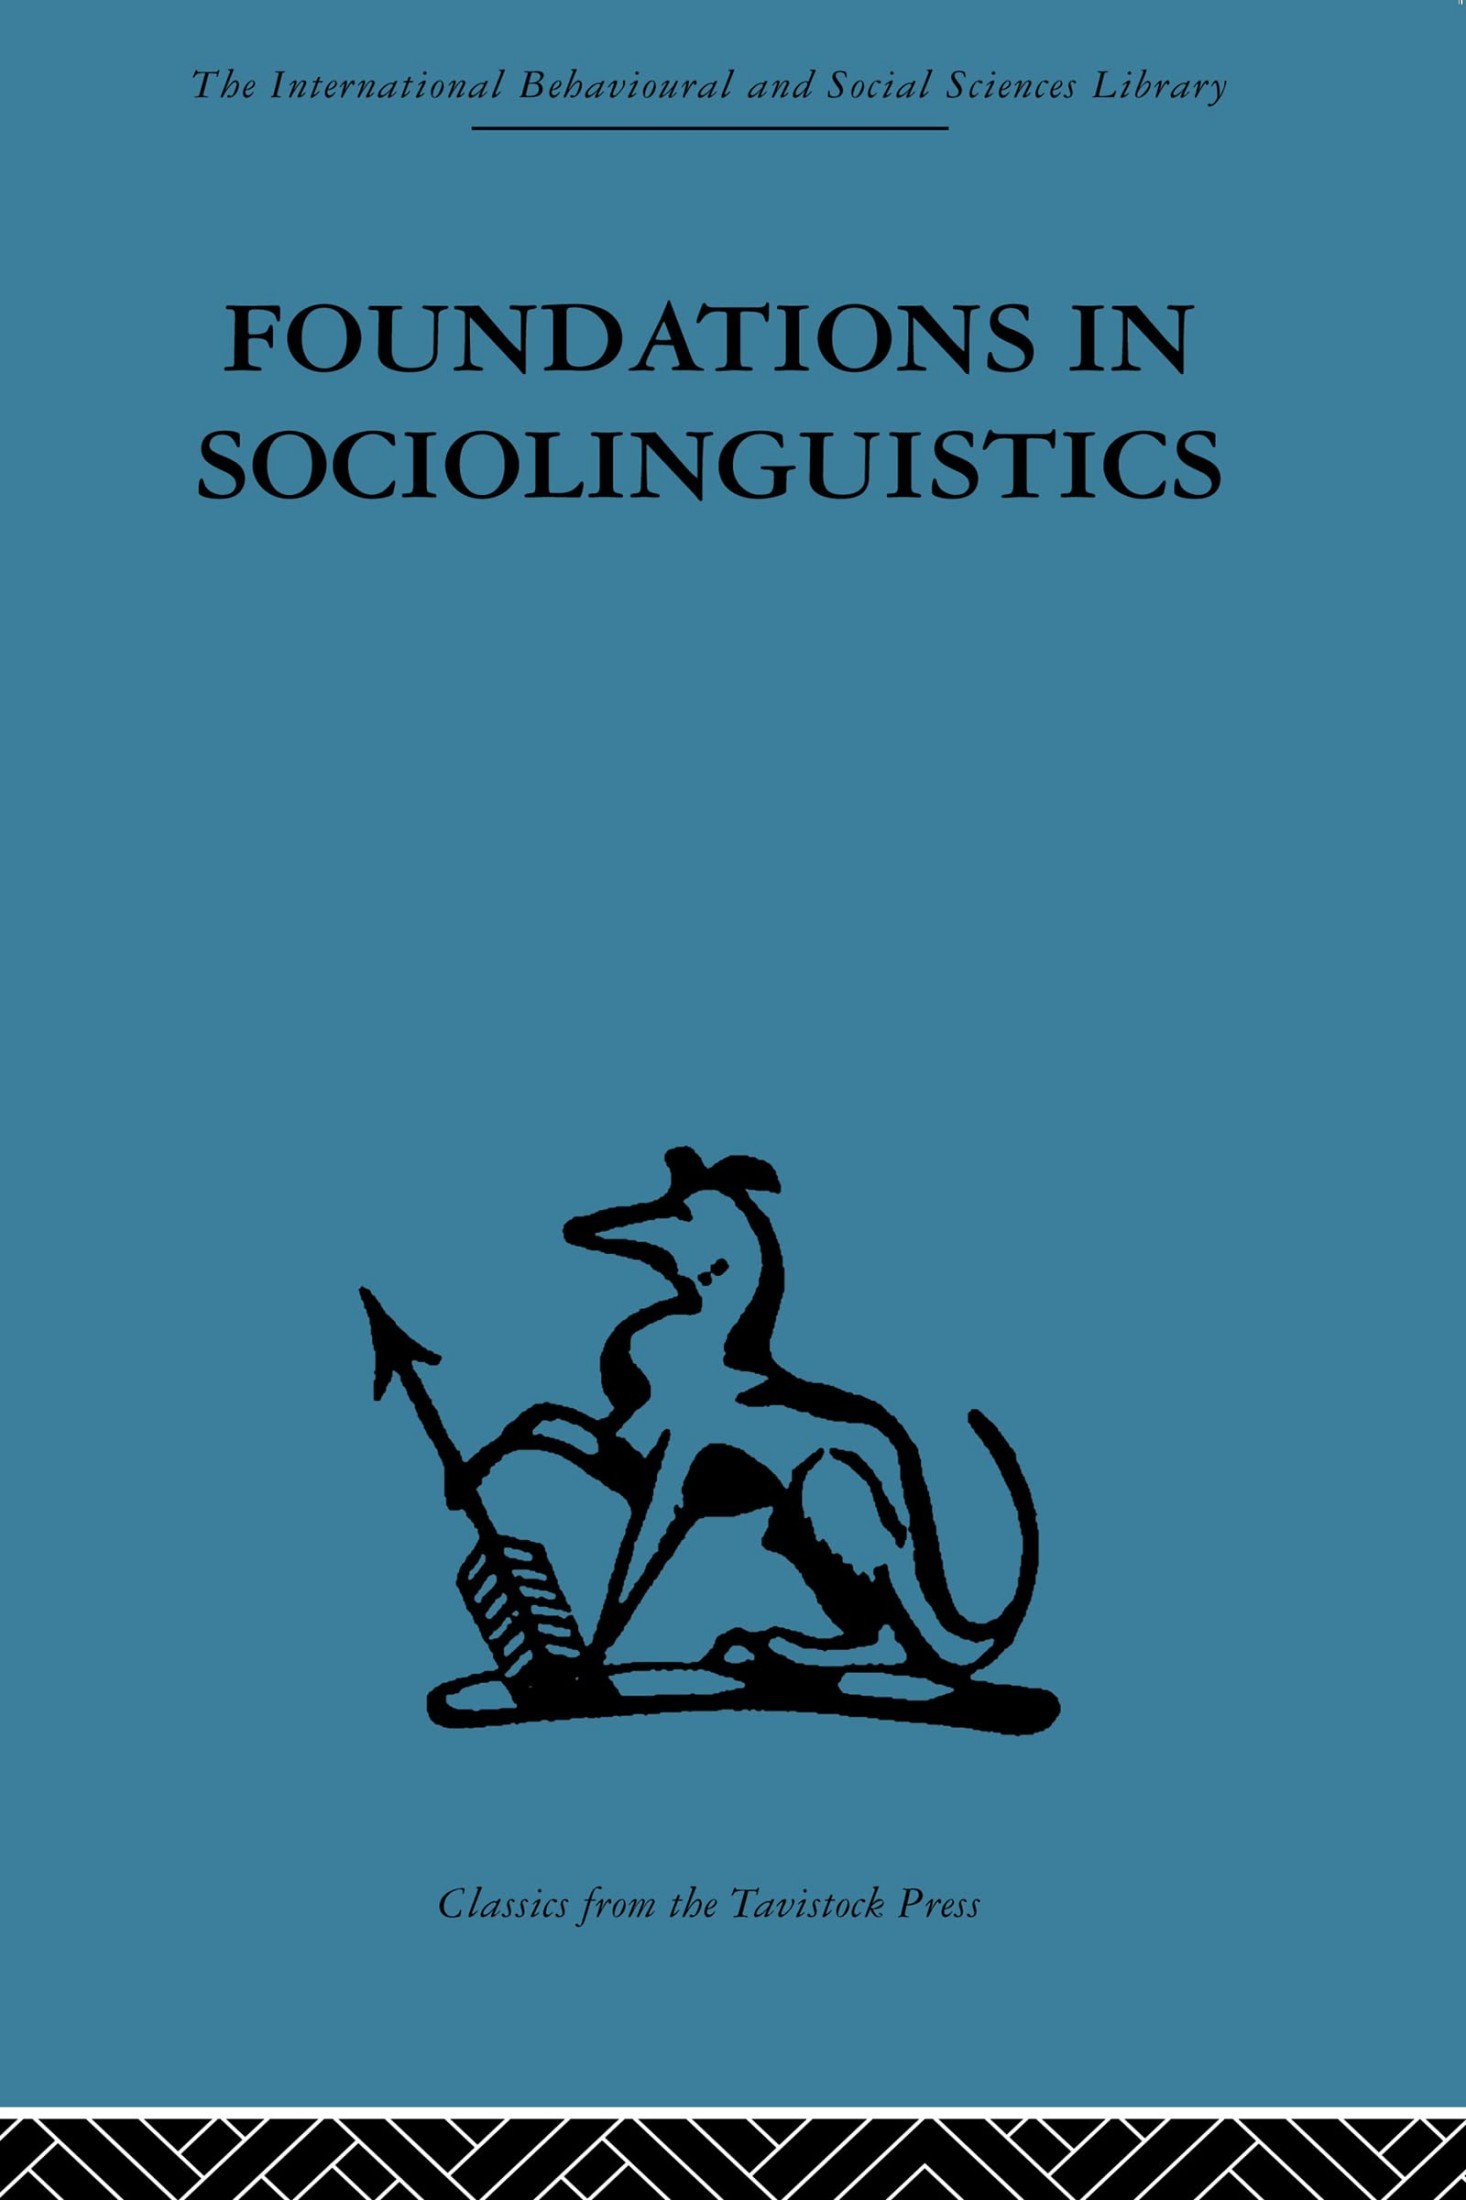 Foundations in Sociolinguistics: An Ethnographic Approach